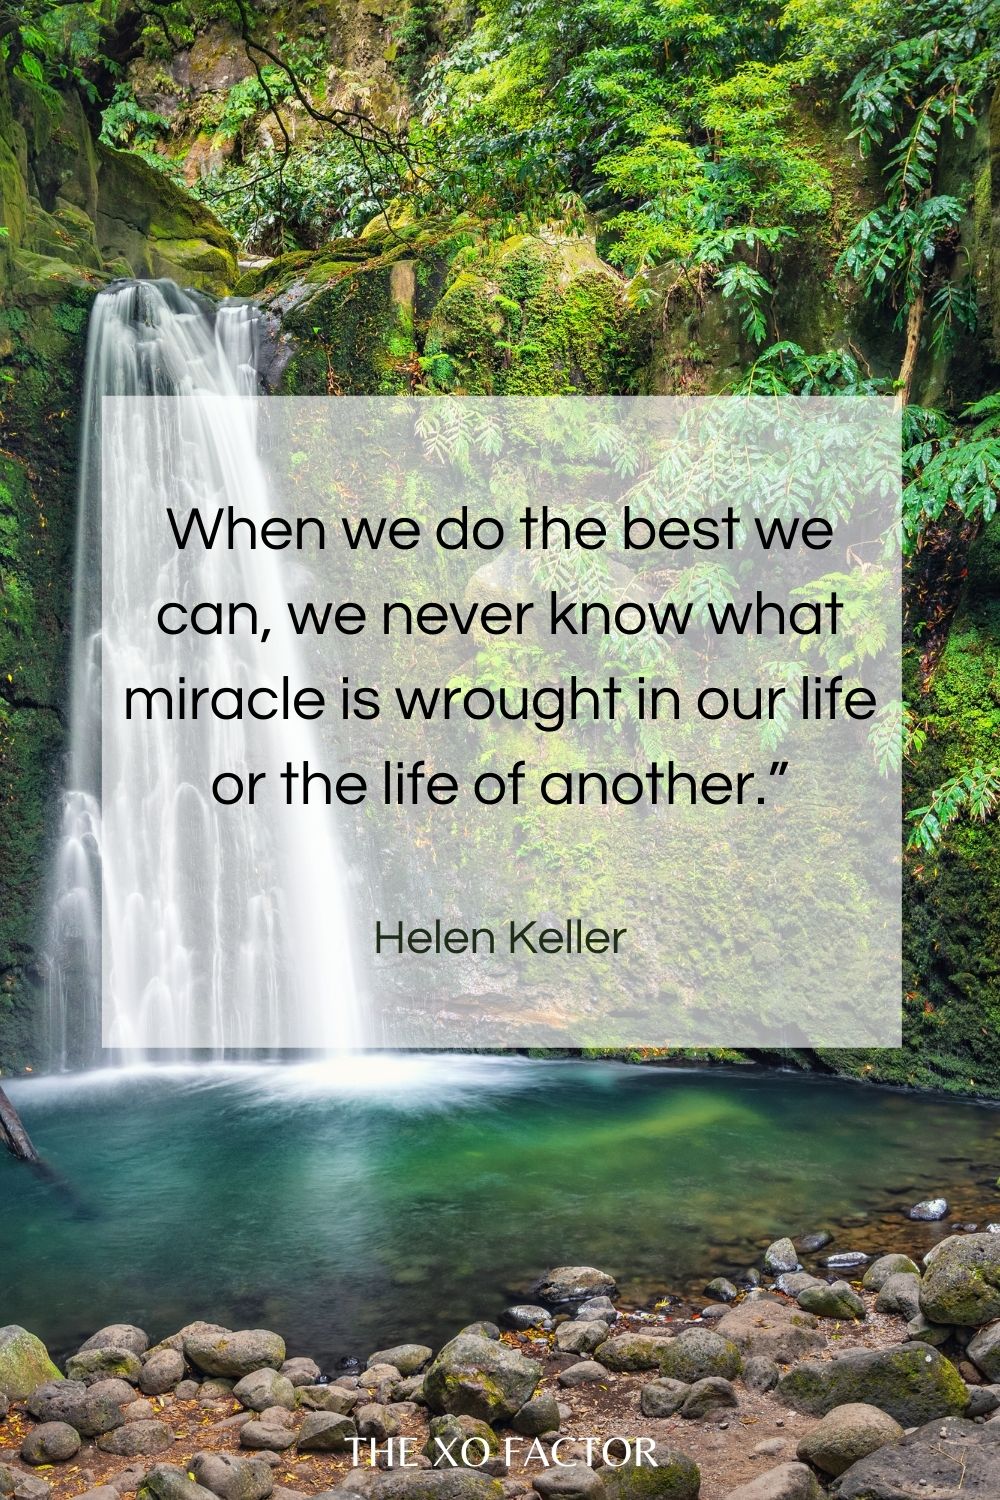 When we do the best we can, we never know what miracle is wrought in our life or the life of another.” Helen Keller